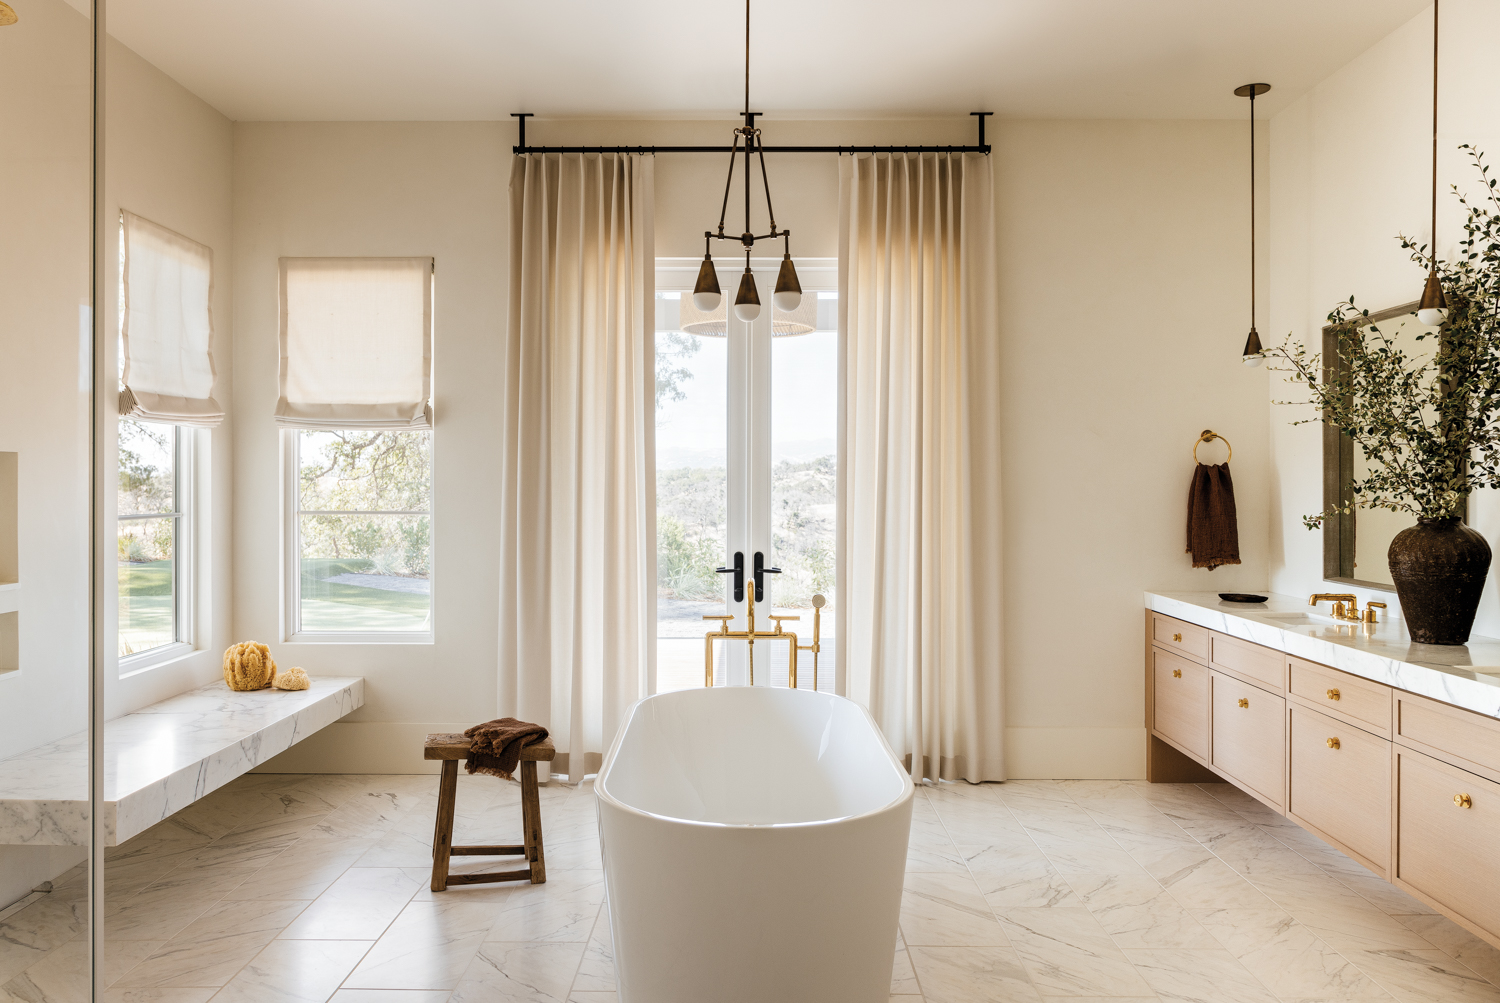 bathroom tub overlooking outside space with oak cabinetry, neutral tile and brass light fixture